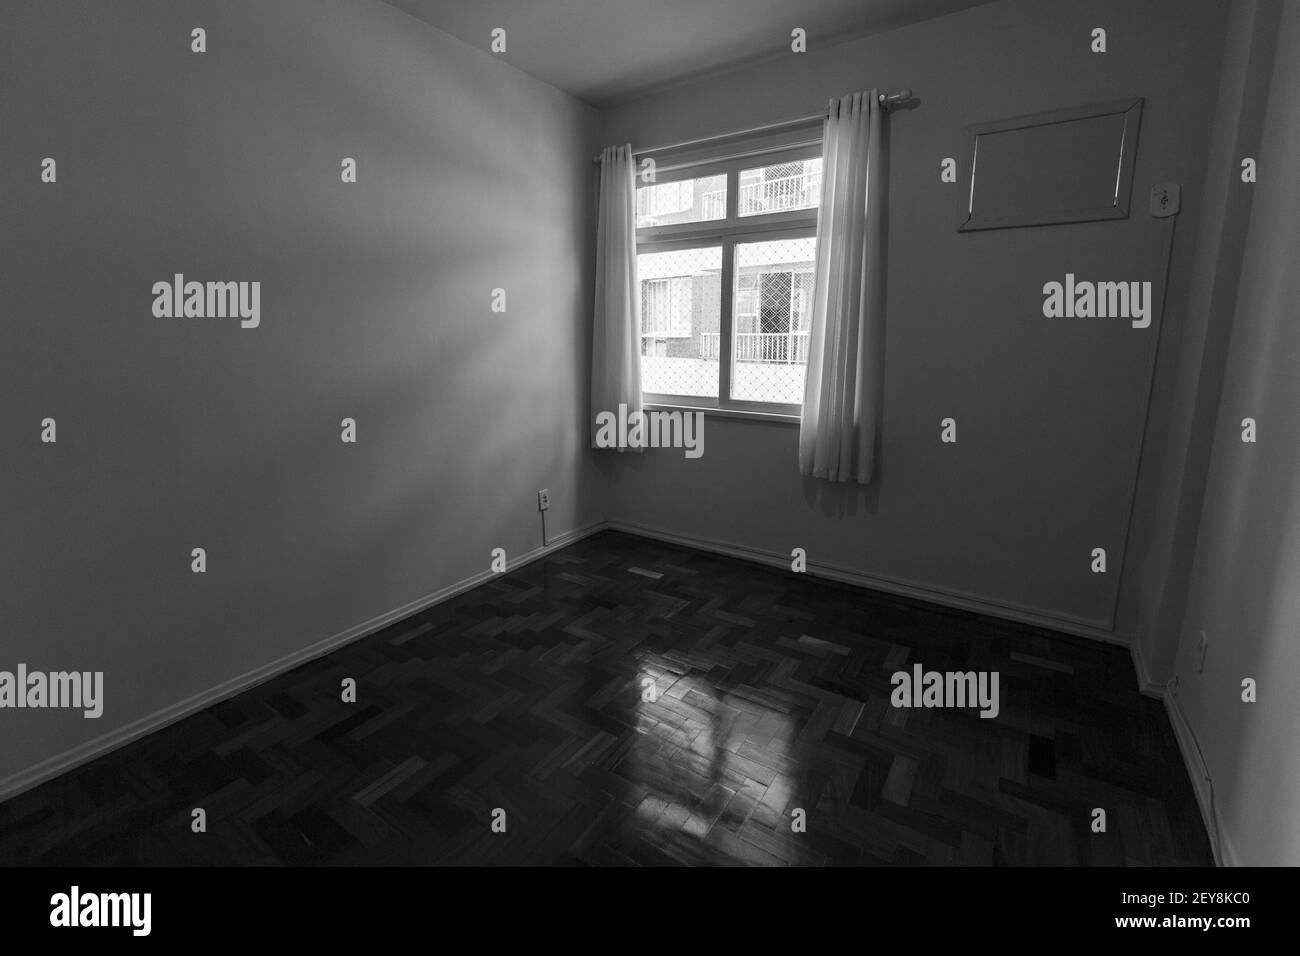 An empty apartment room interior with casement windows Stock Photo